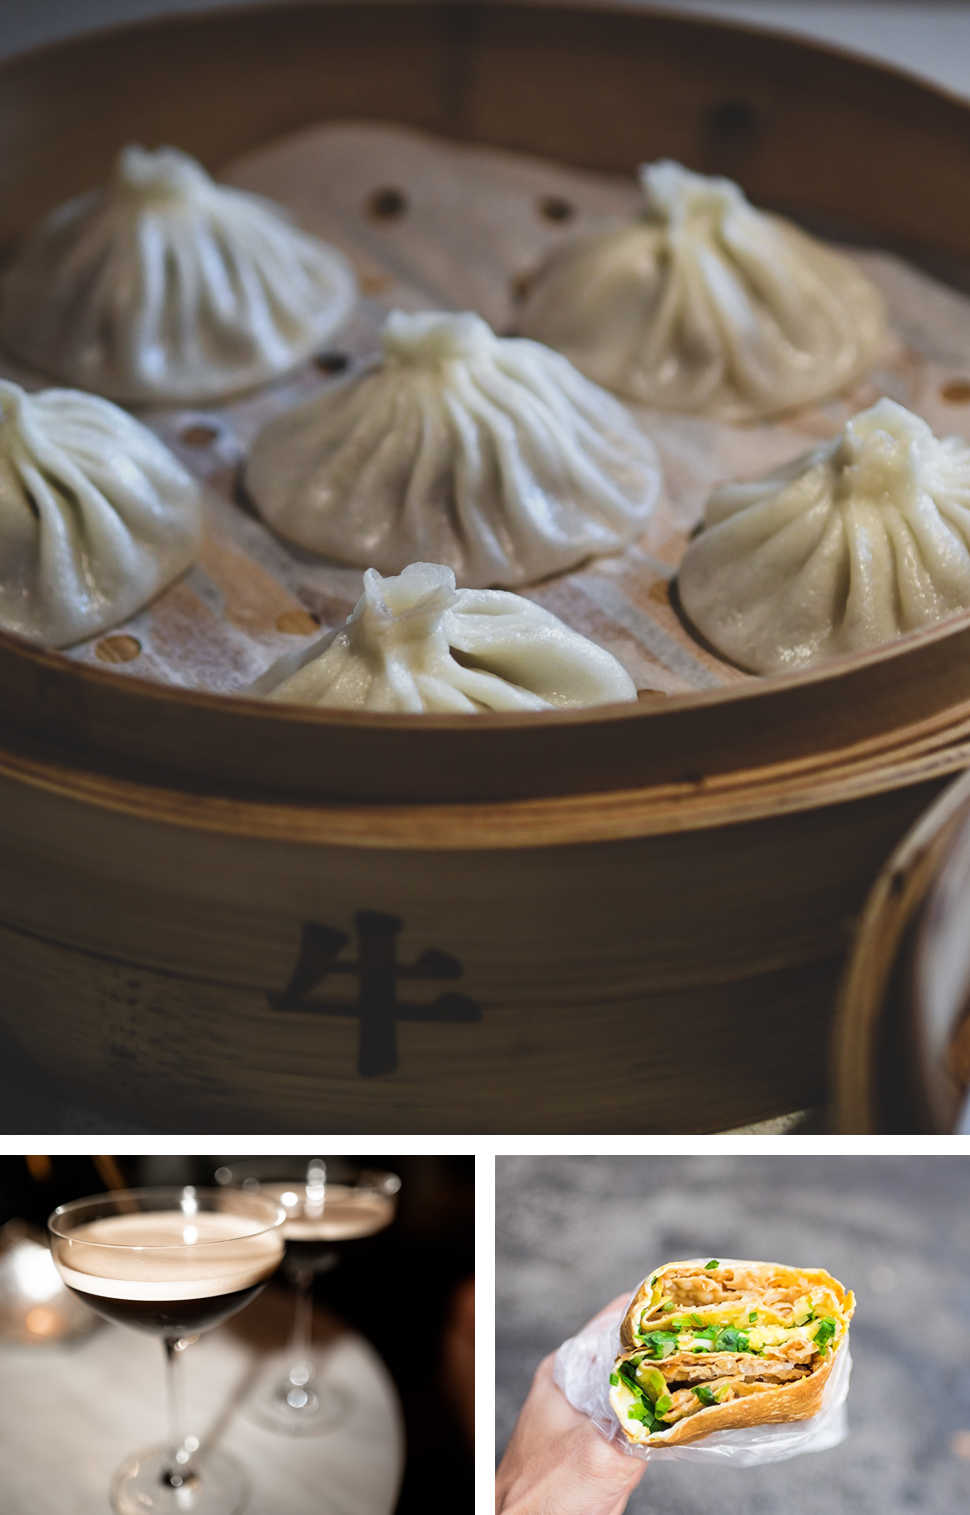 steaming dumplings in a traditional wooden box